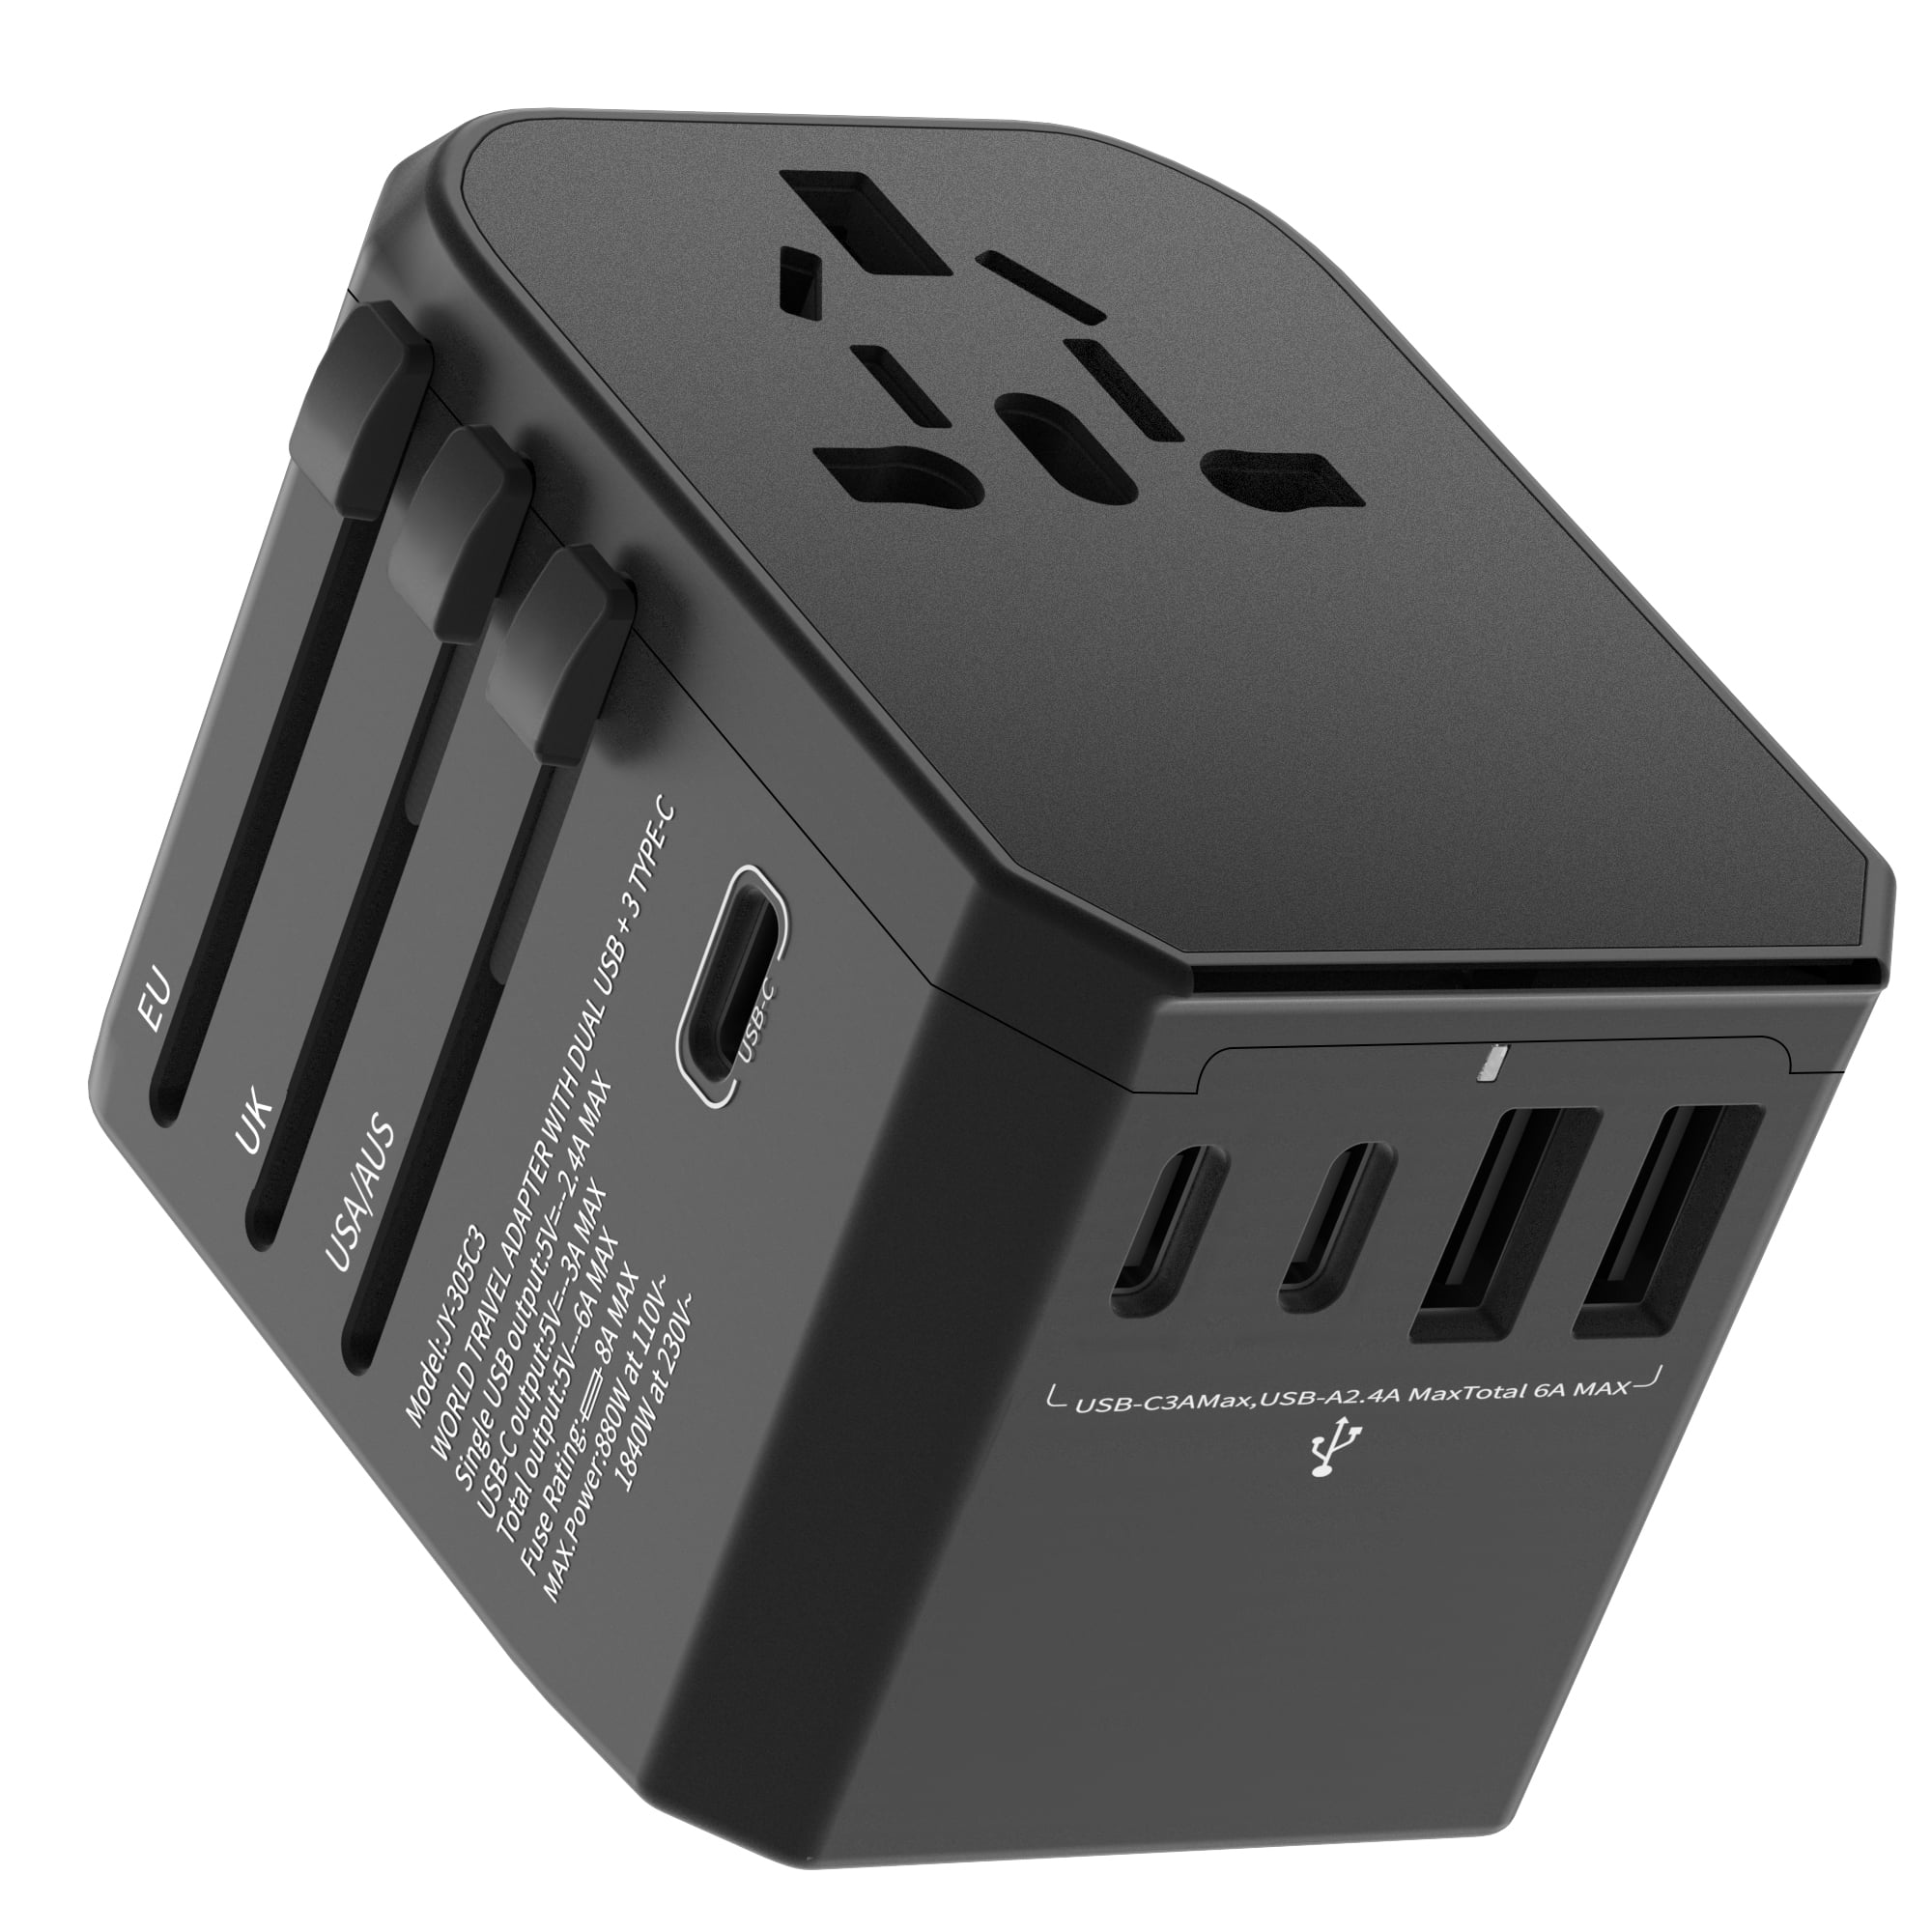 SZROBOY Universal Travel Adapter,All-in-one International USB Travel  Adapter with High Speed 5.6A 5-Port USB Charger Worldwide AC Wall Outlet  Plugs for for Business Travel of US,EU,UK,AU 200+C 